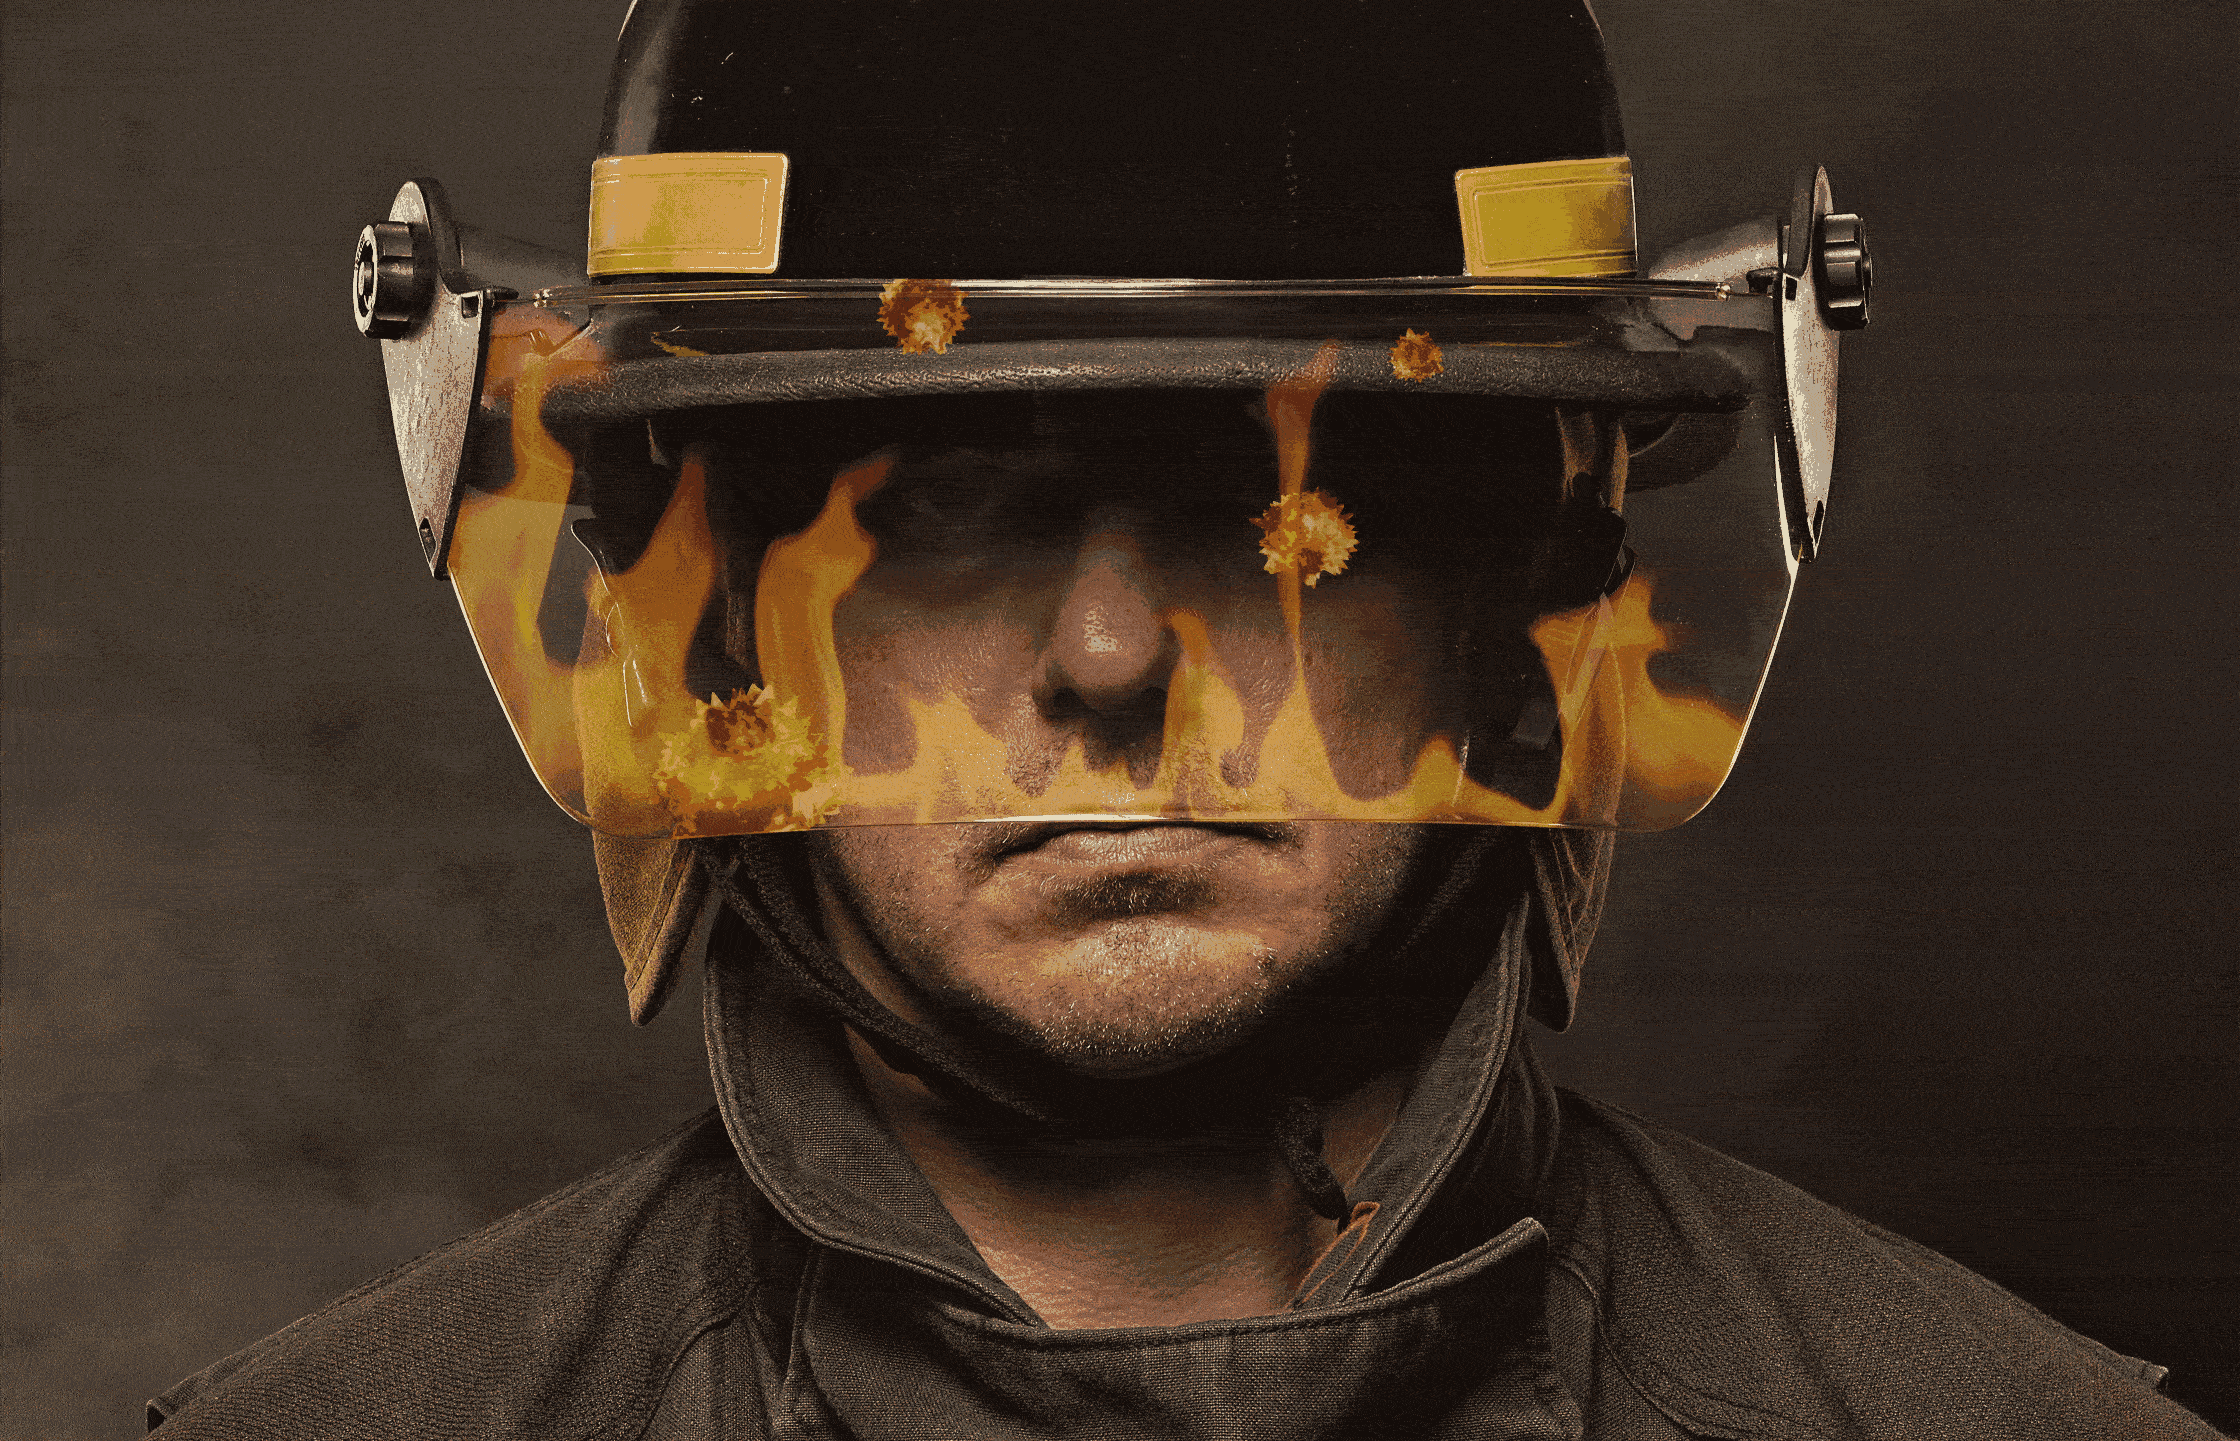 Animated image for a fireman with flames reflecting in visor